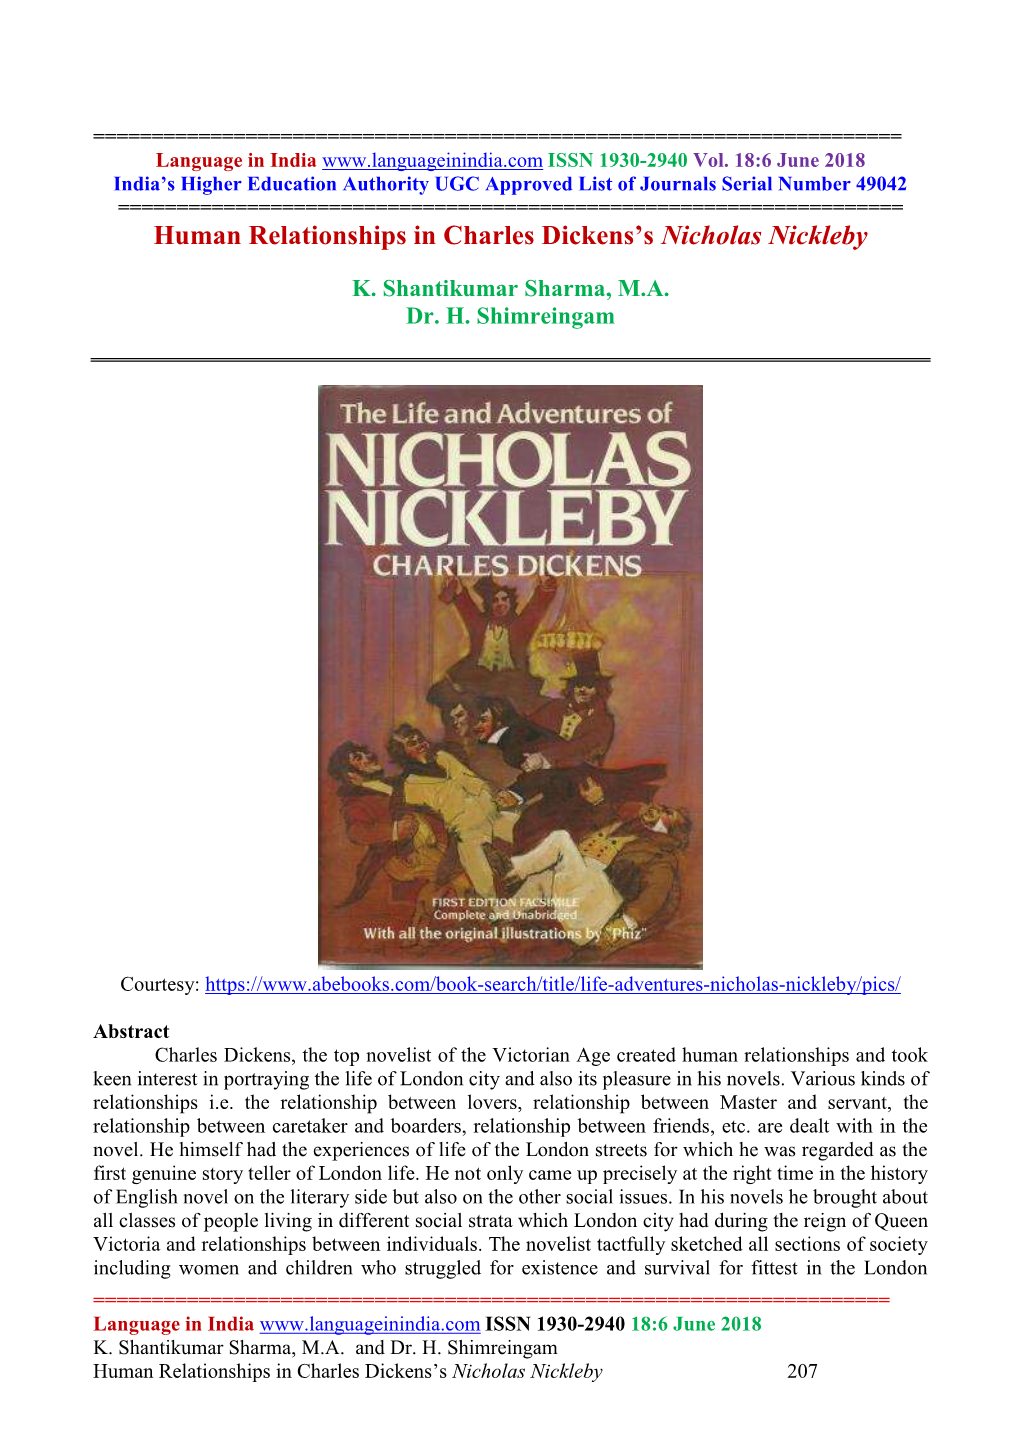 Human Relationships in Charles Dickens's Nicholas Nickleby